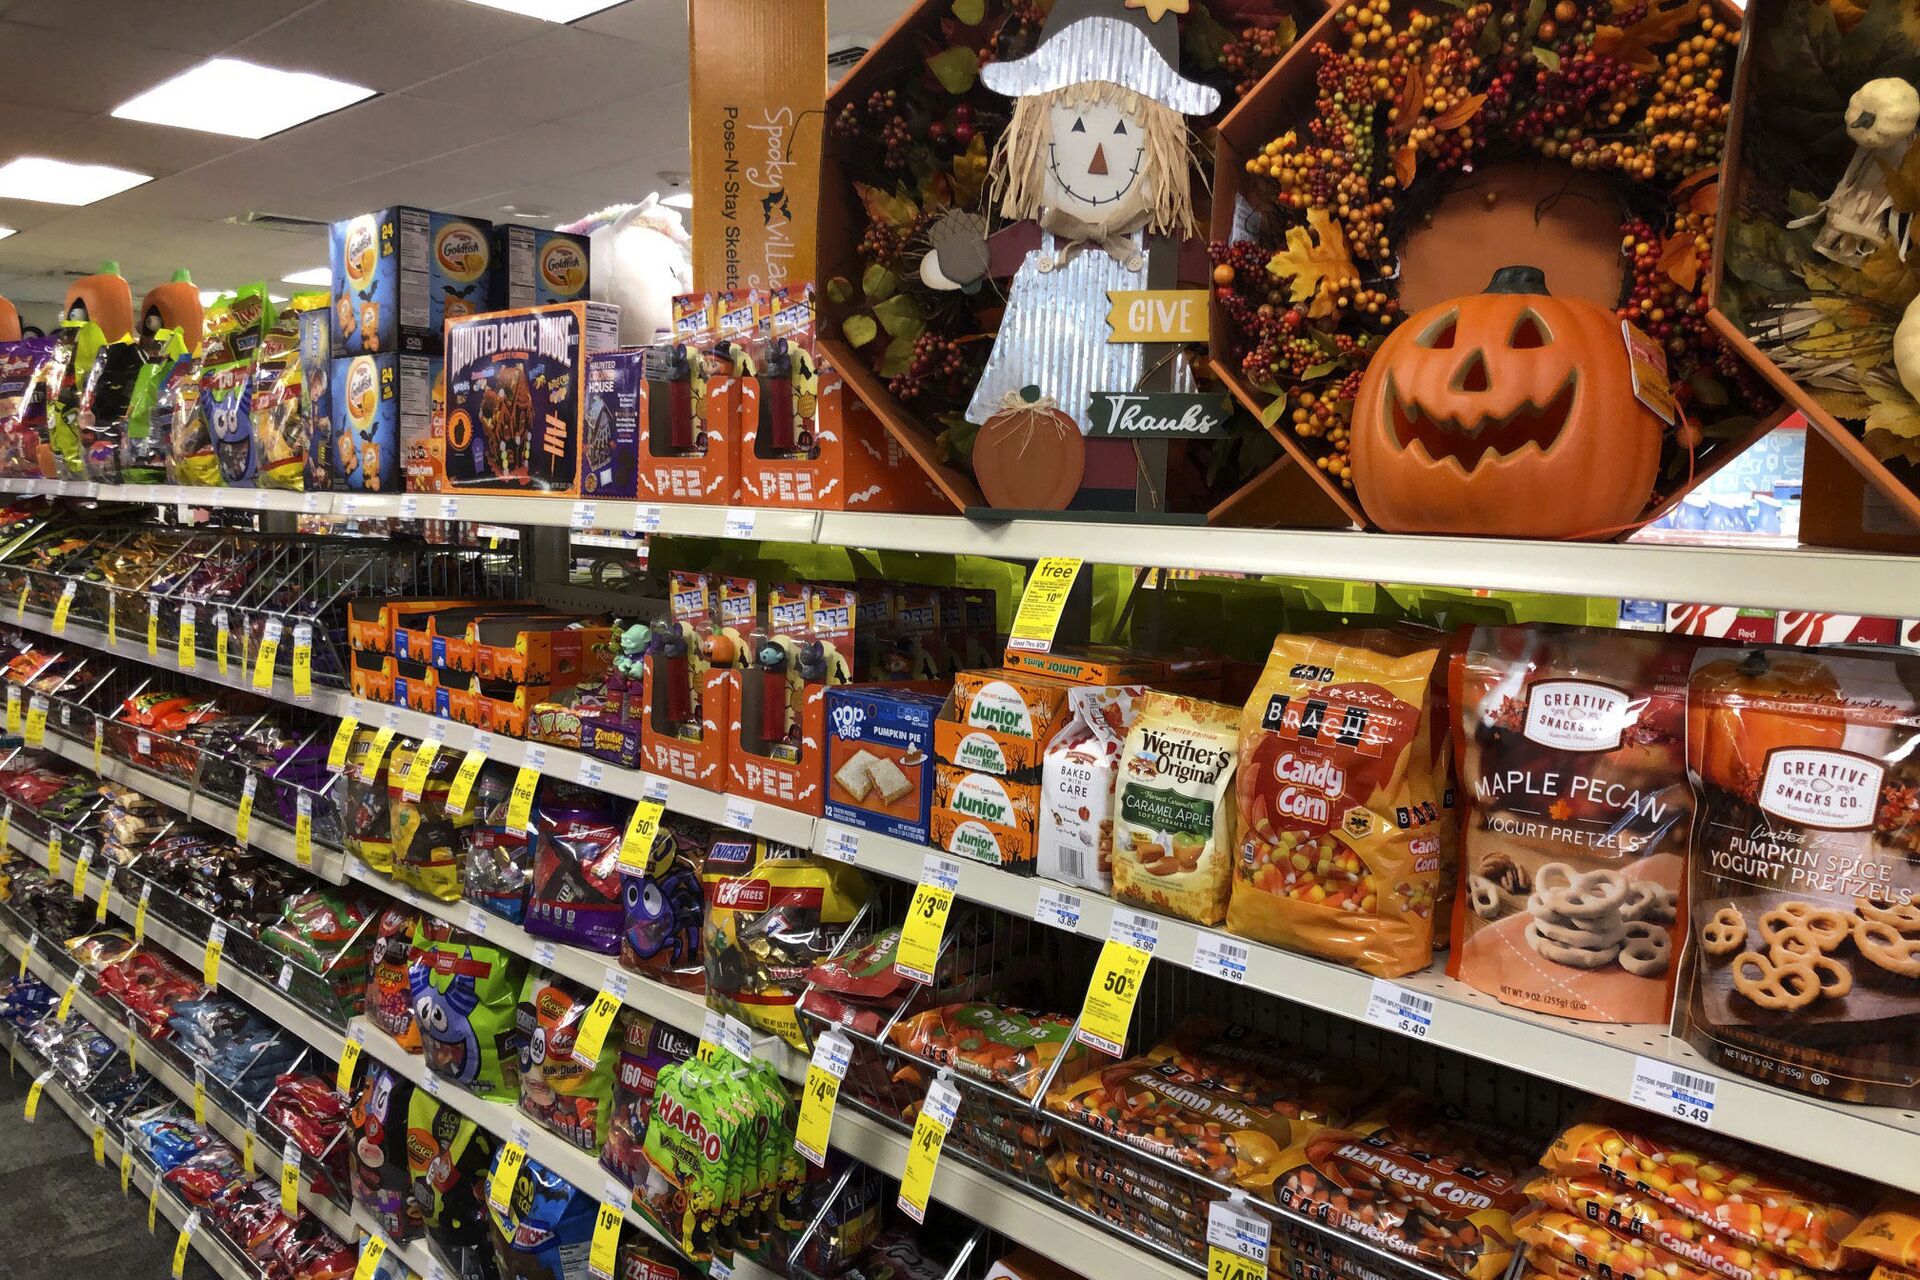 Halloween candy and decorations are displayed at a store, Wednesday, Sept. 23, 2020, in Freeport, Maine. U.S. sales of In this year of the pandemic, with trick-or-treating still an uncertainty, Halloween candy were up 13% over last year in the month ending Sept. 6, according to data from market research firm IRI and the National Confectioners Association.  - Sputnik International, 1920, 27.10.2021